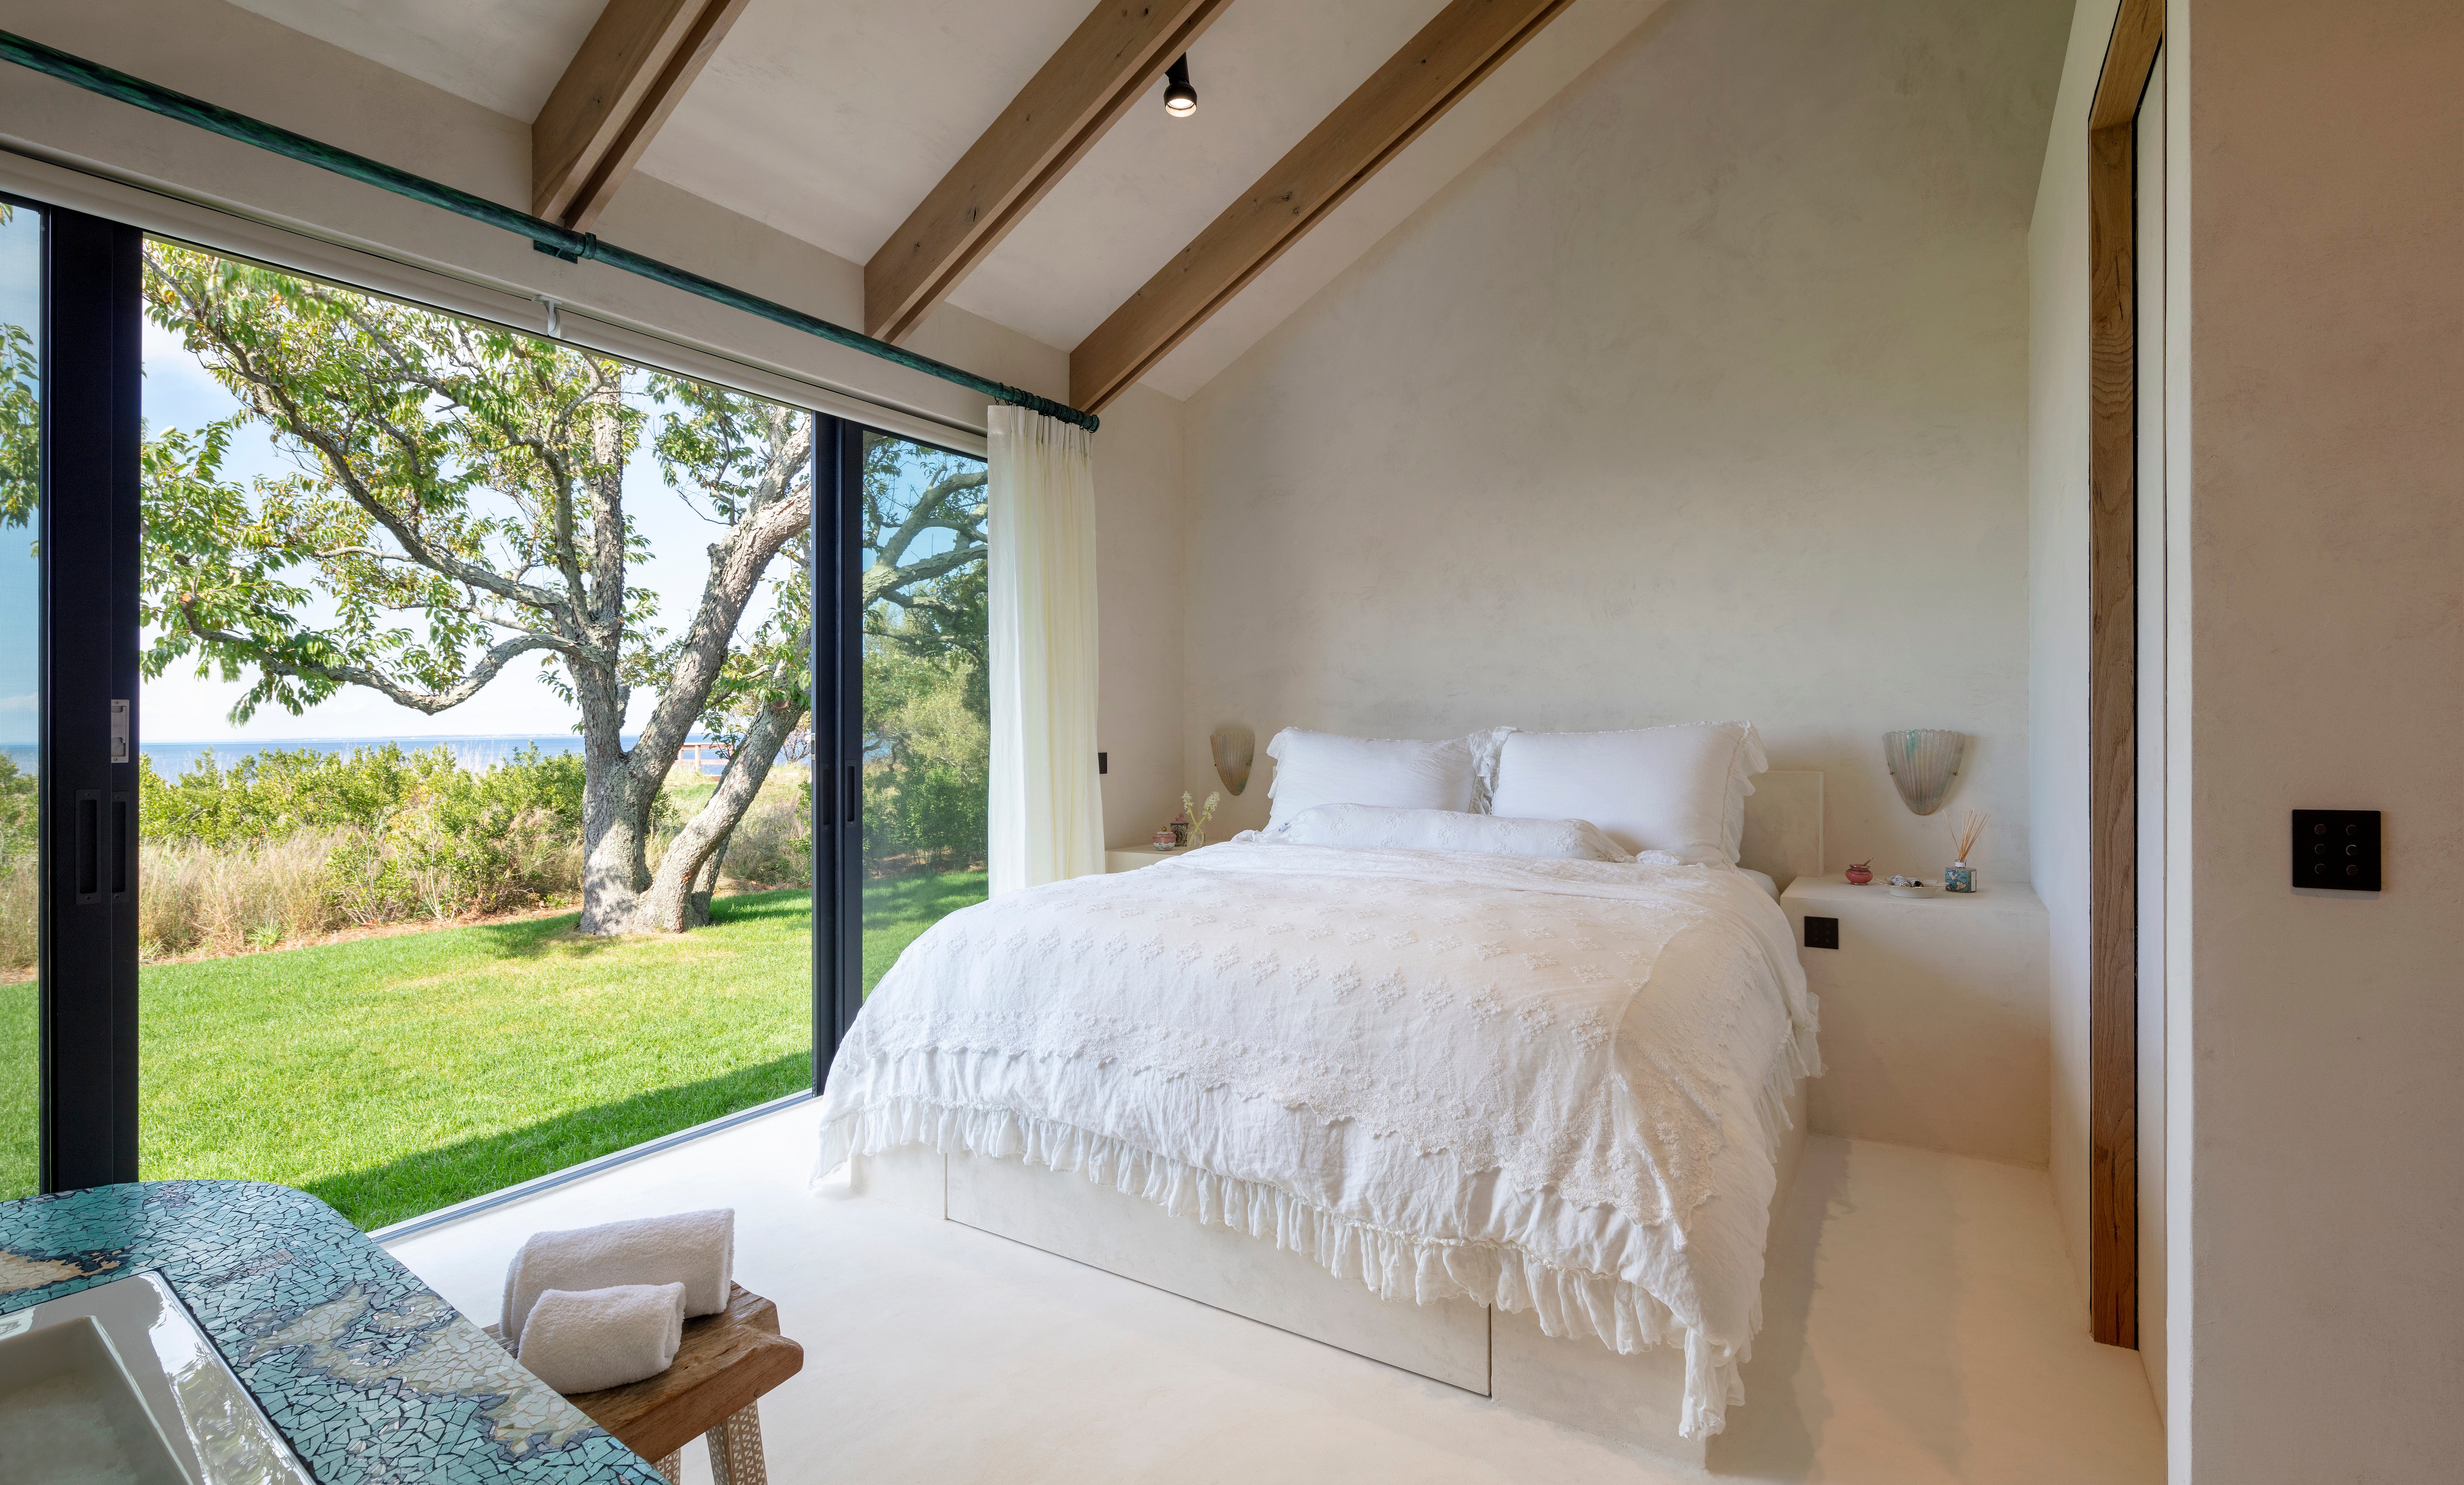 A bedroom photographed in the afternoon with daylight streaming in from a sliding glass door along the wall. 